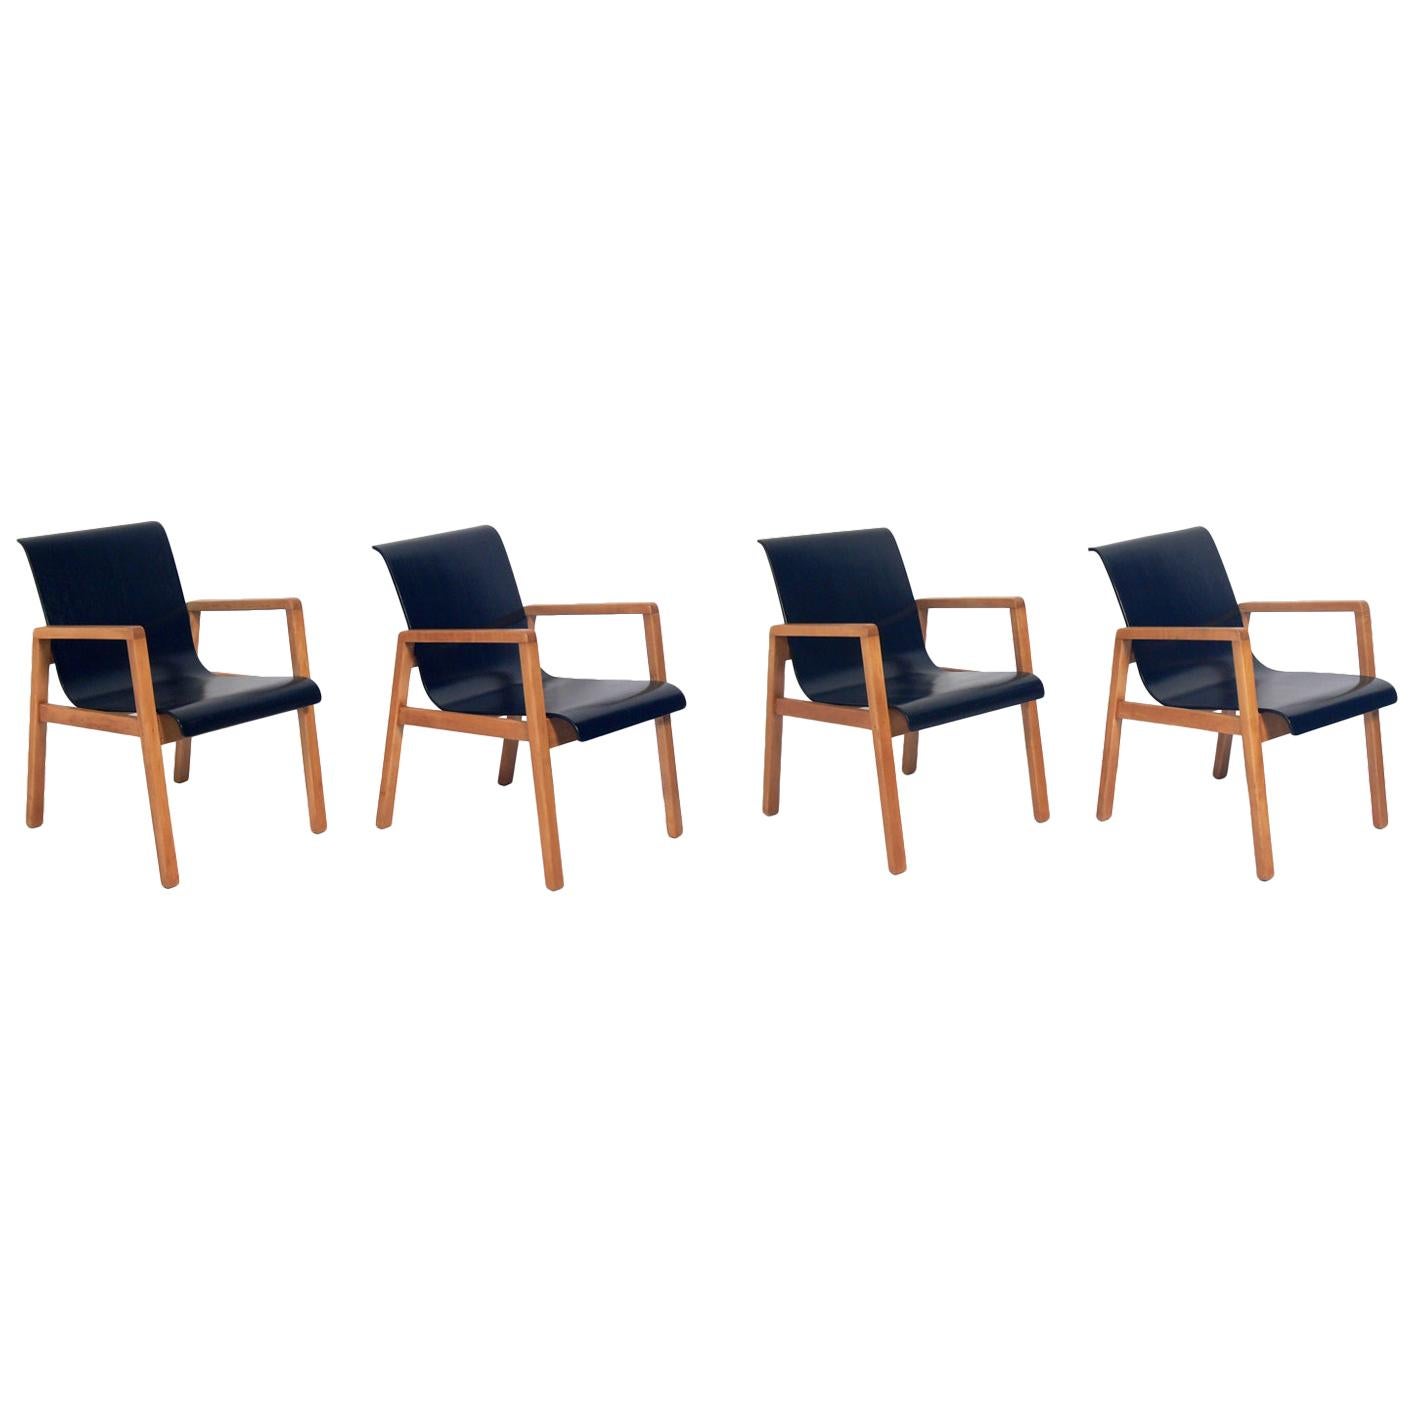 Set of Four Alvar Aalto Bentwood Dining or Armchairs, circa 1940s